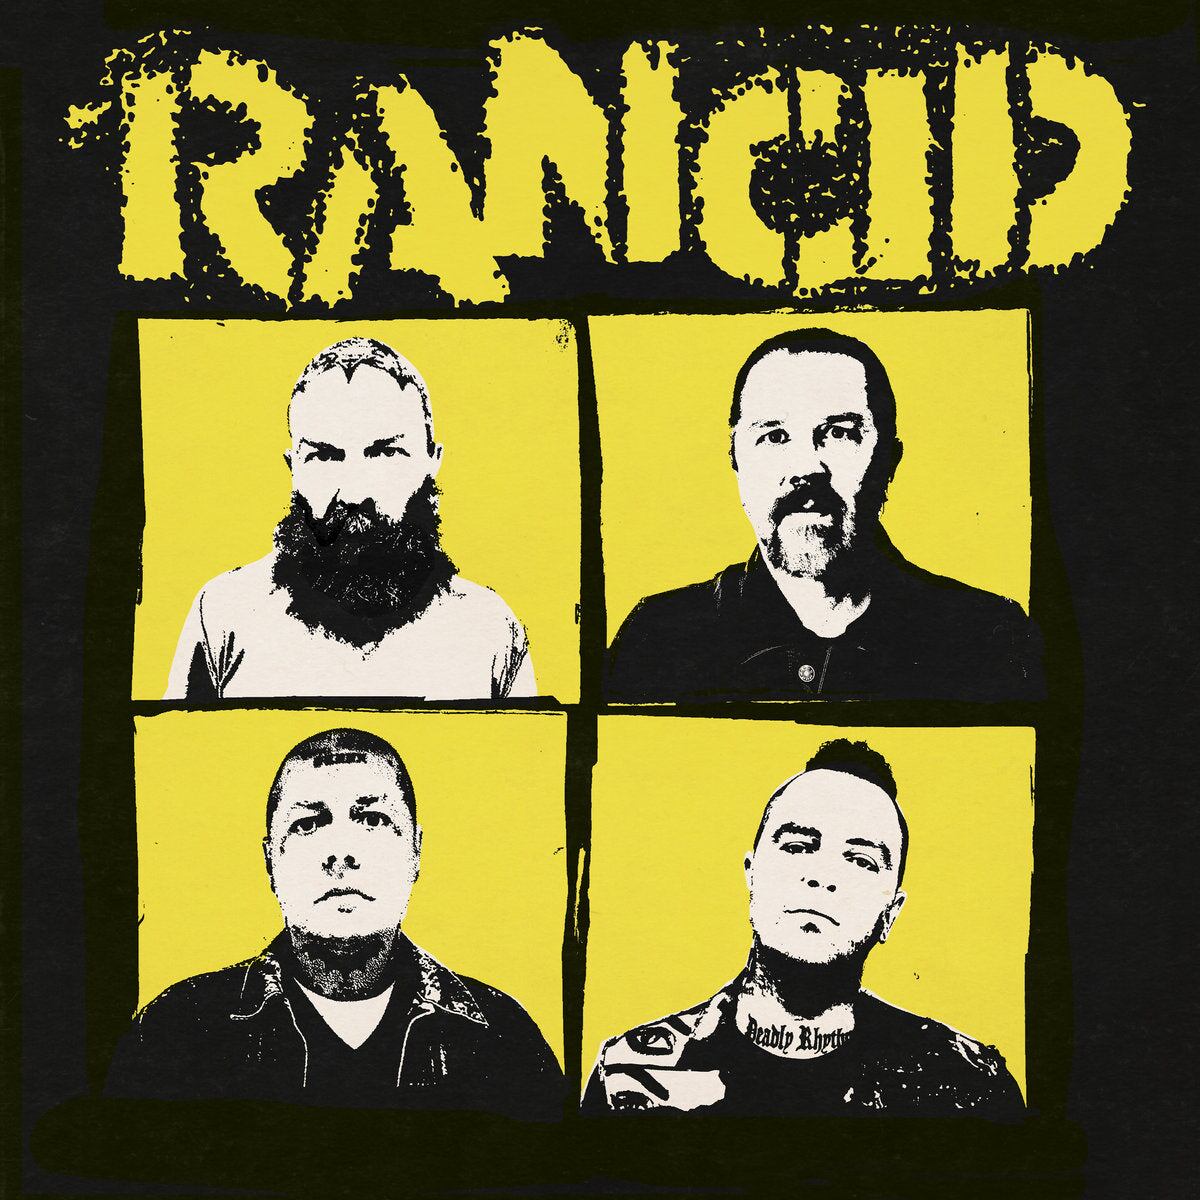 Cover of 'Tomorrow Never Comes', by Rancid.